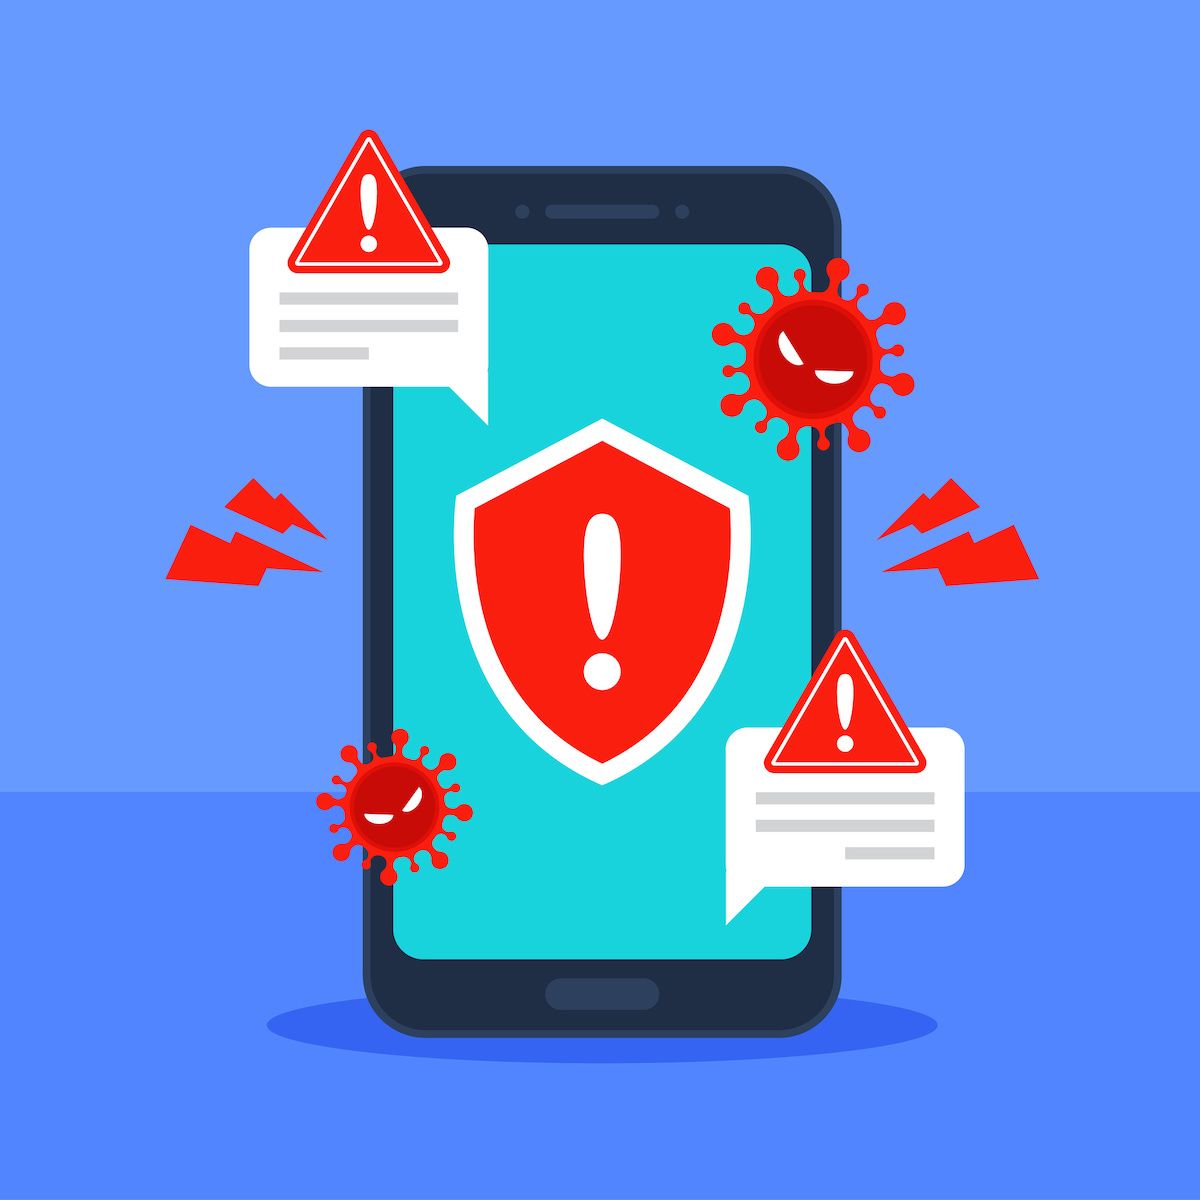 An illustration of cybersecurity threats discovered on a smartphone. Some may be false positives, or incorrectly flagged legitimate programs.